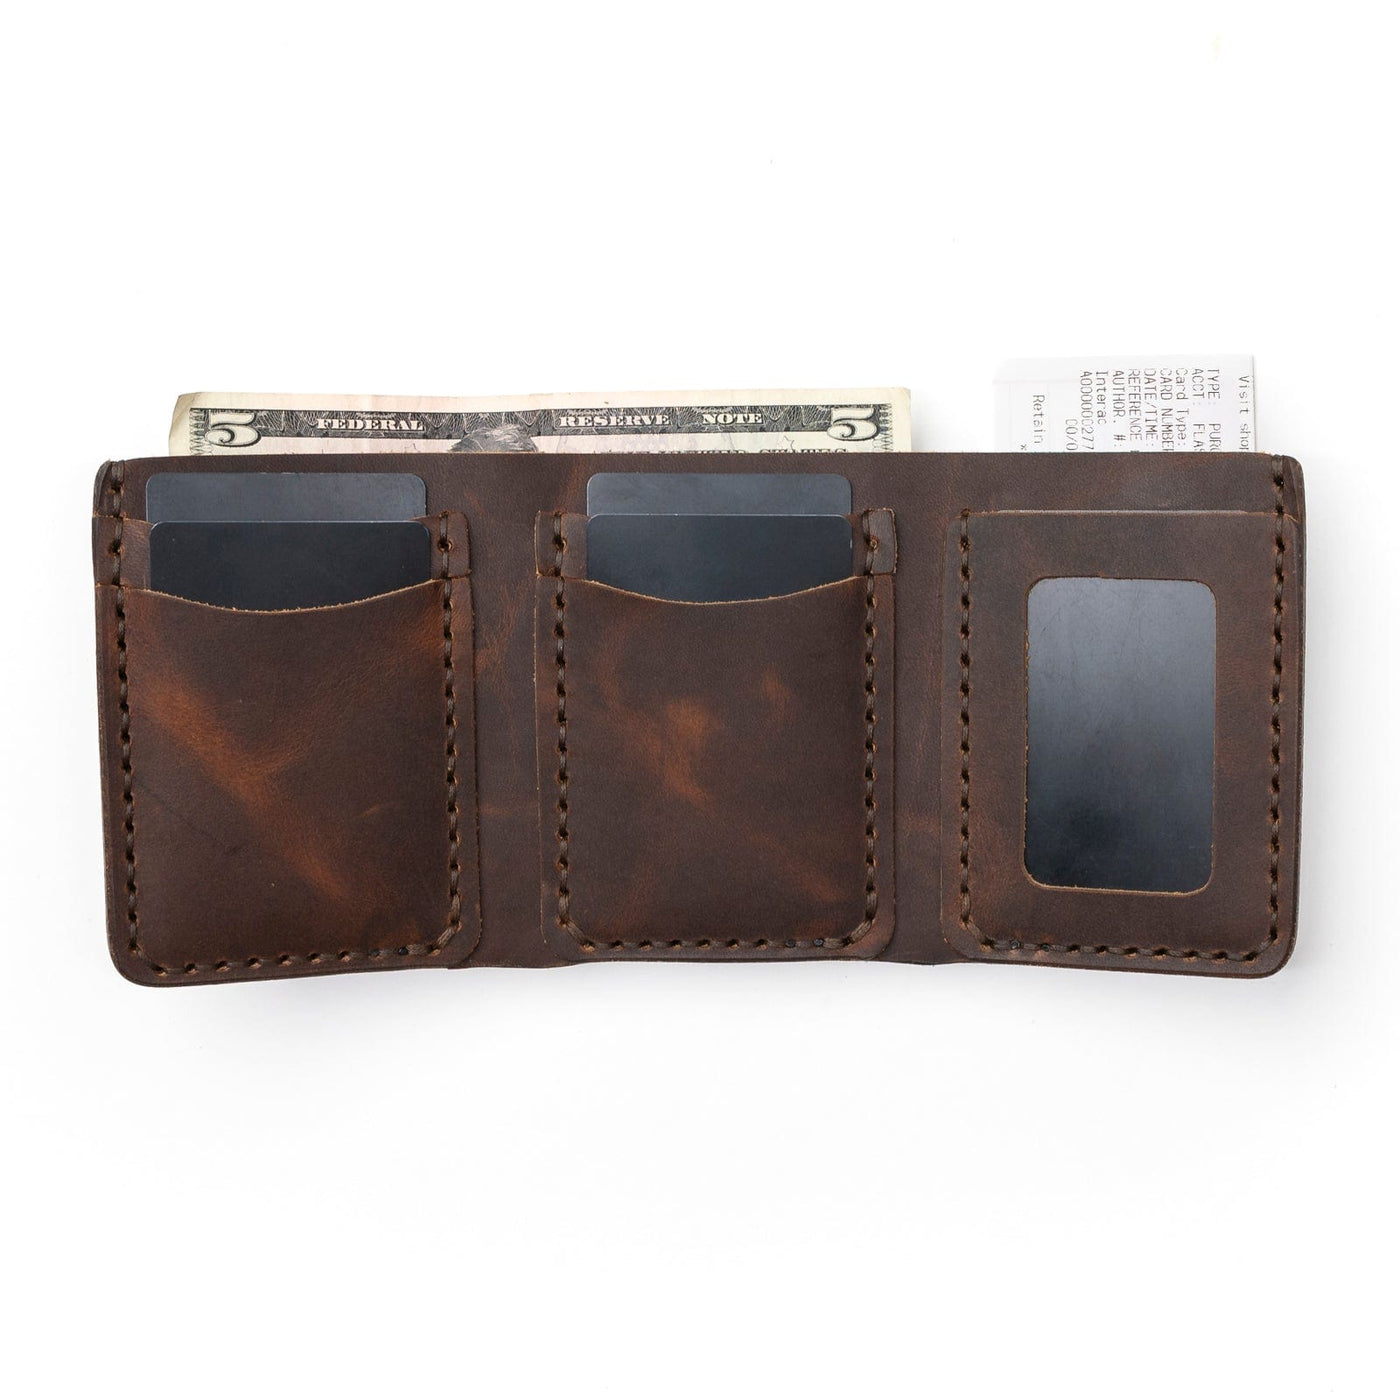 Leather Trifold Wallet - Heritage Brown Popov Leather